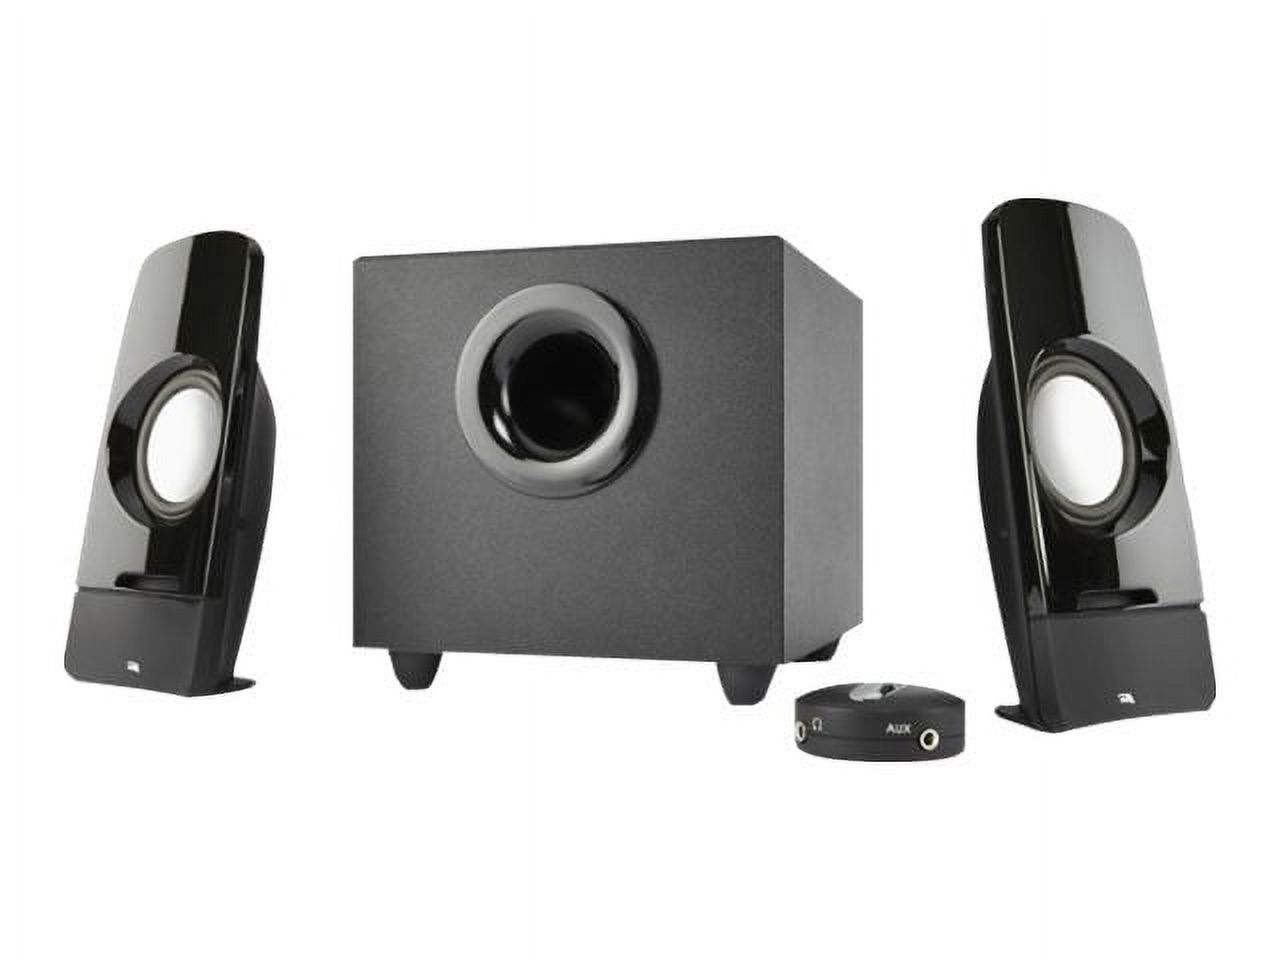 Cyber Acoustics Powerful Curve Series Storm 44W Speaker System with Control Pod (CA-3350) - image 2 of 2